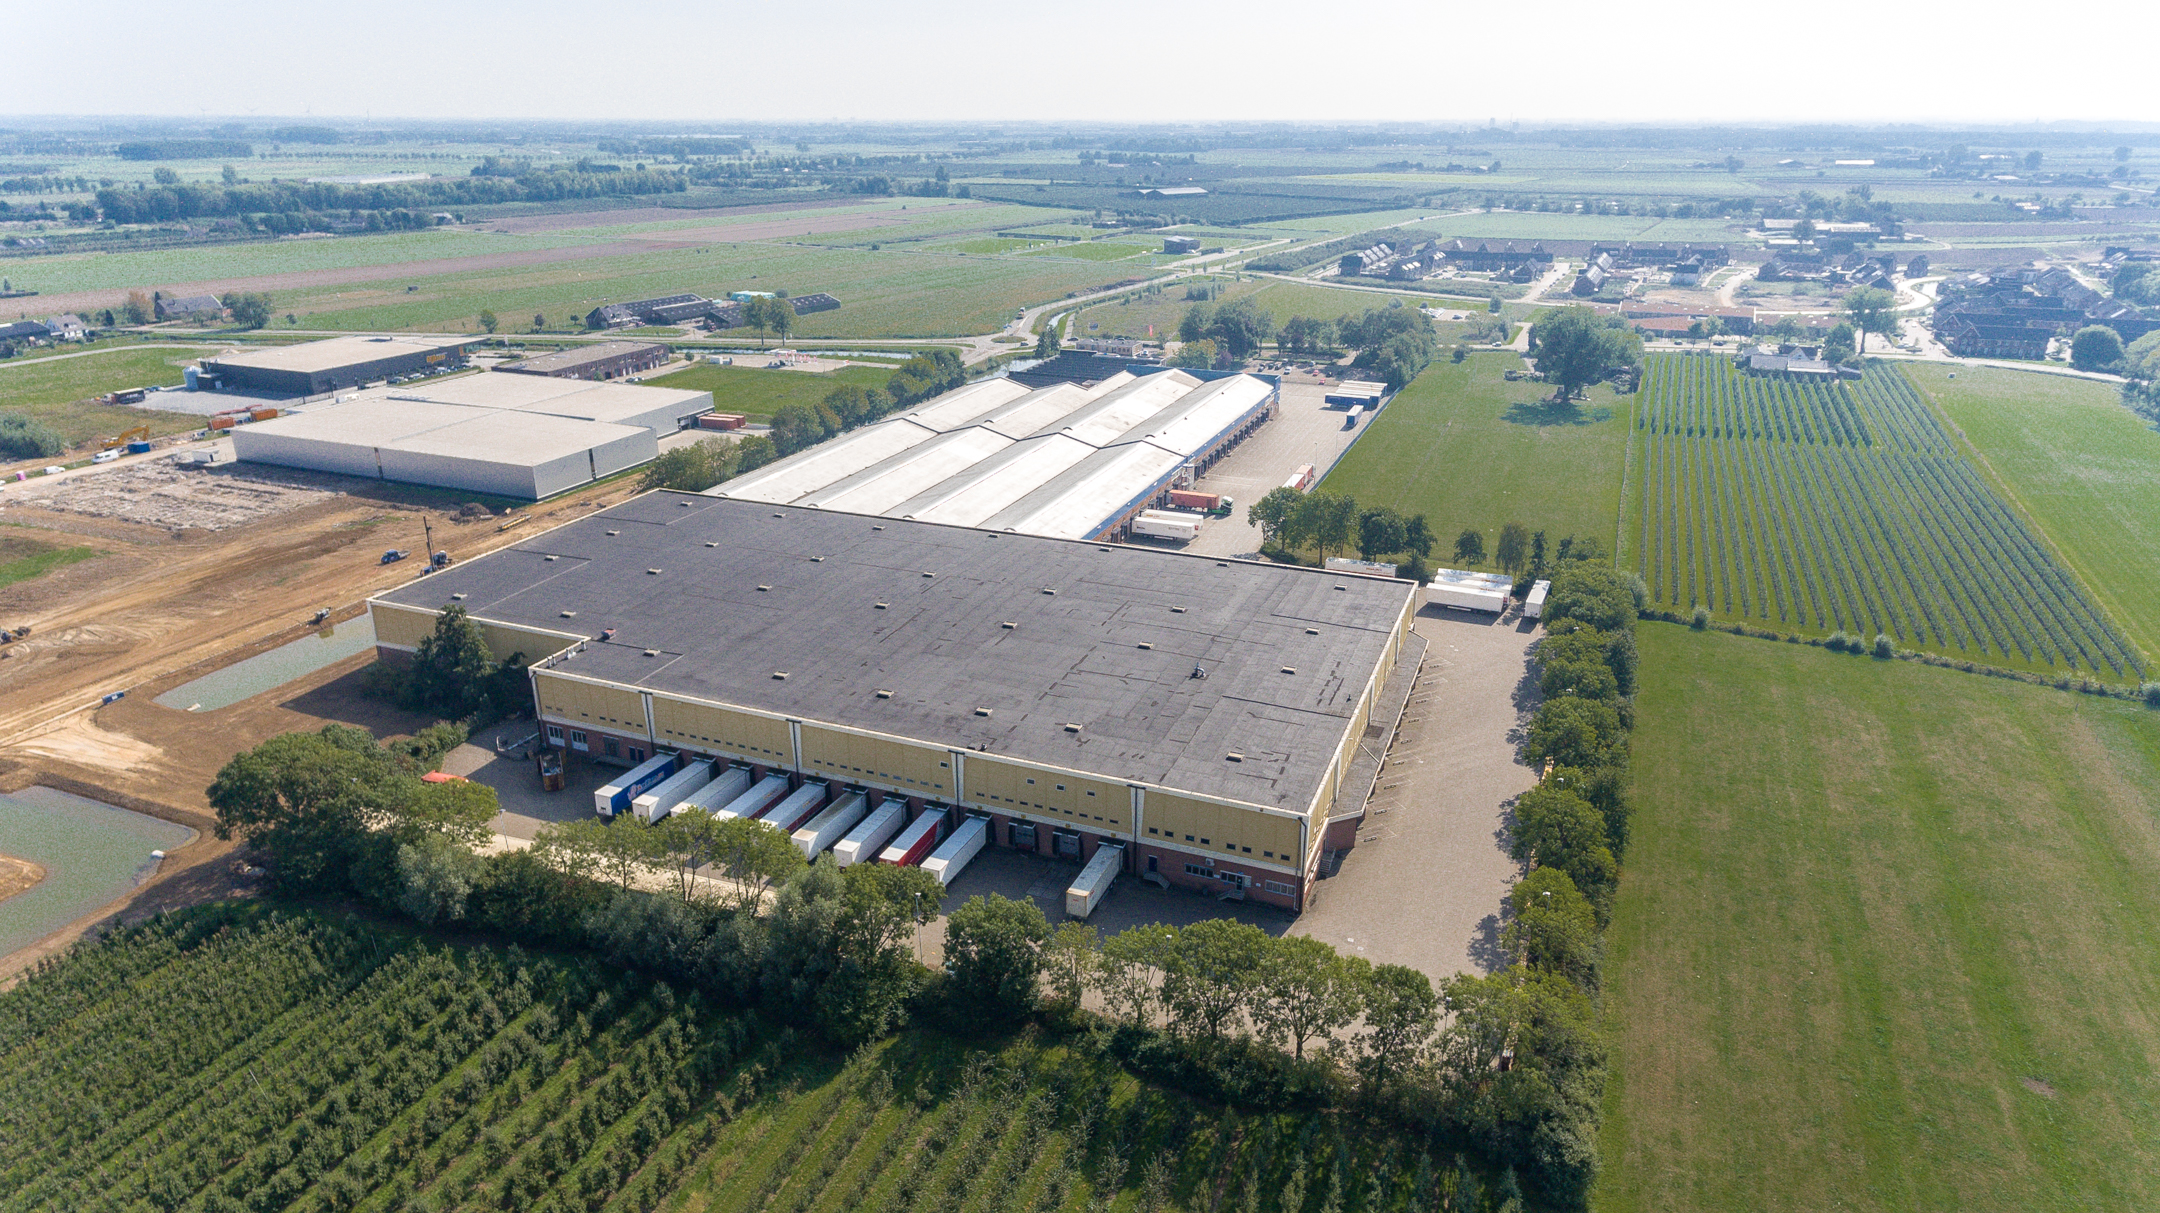 VDG Real Estate acquires Wehkamp business complex of 45,000 sqm in Maurik